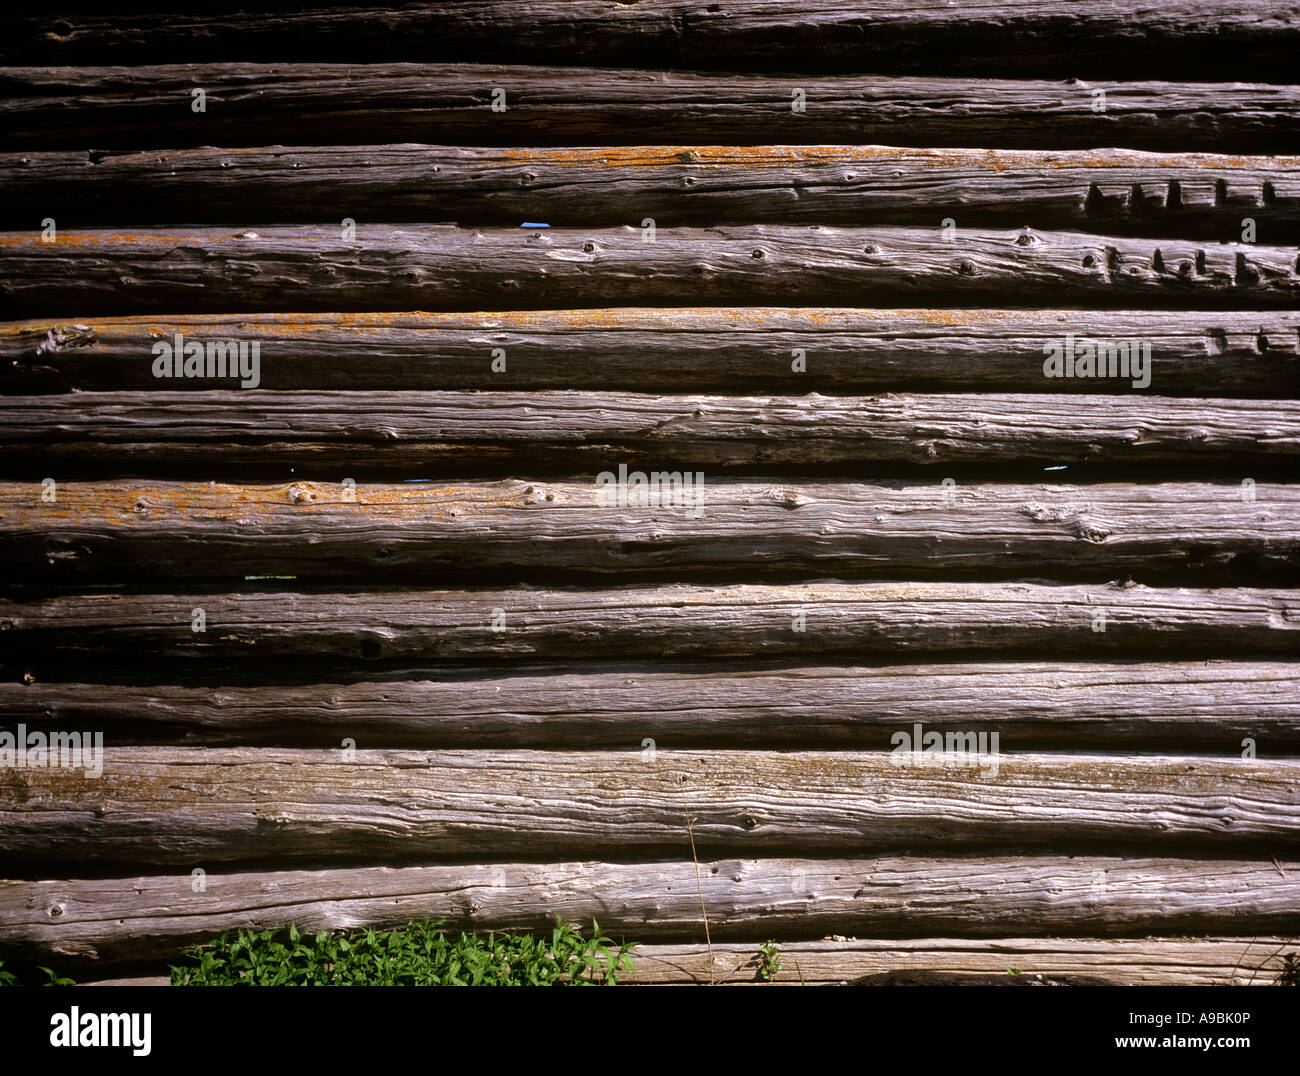 roughly trimmed logs secured horizontally to form a well ventilated but secure barn Stock Photo